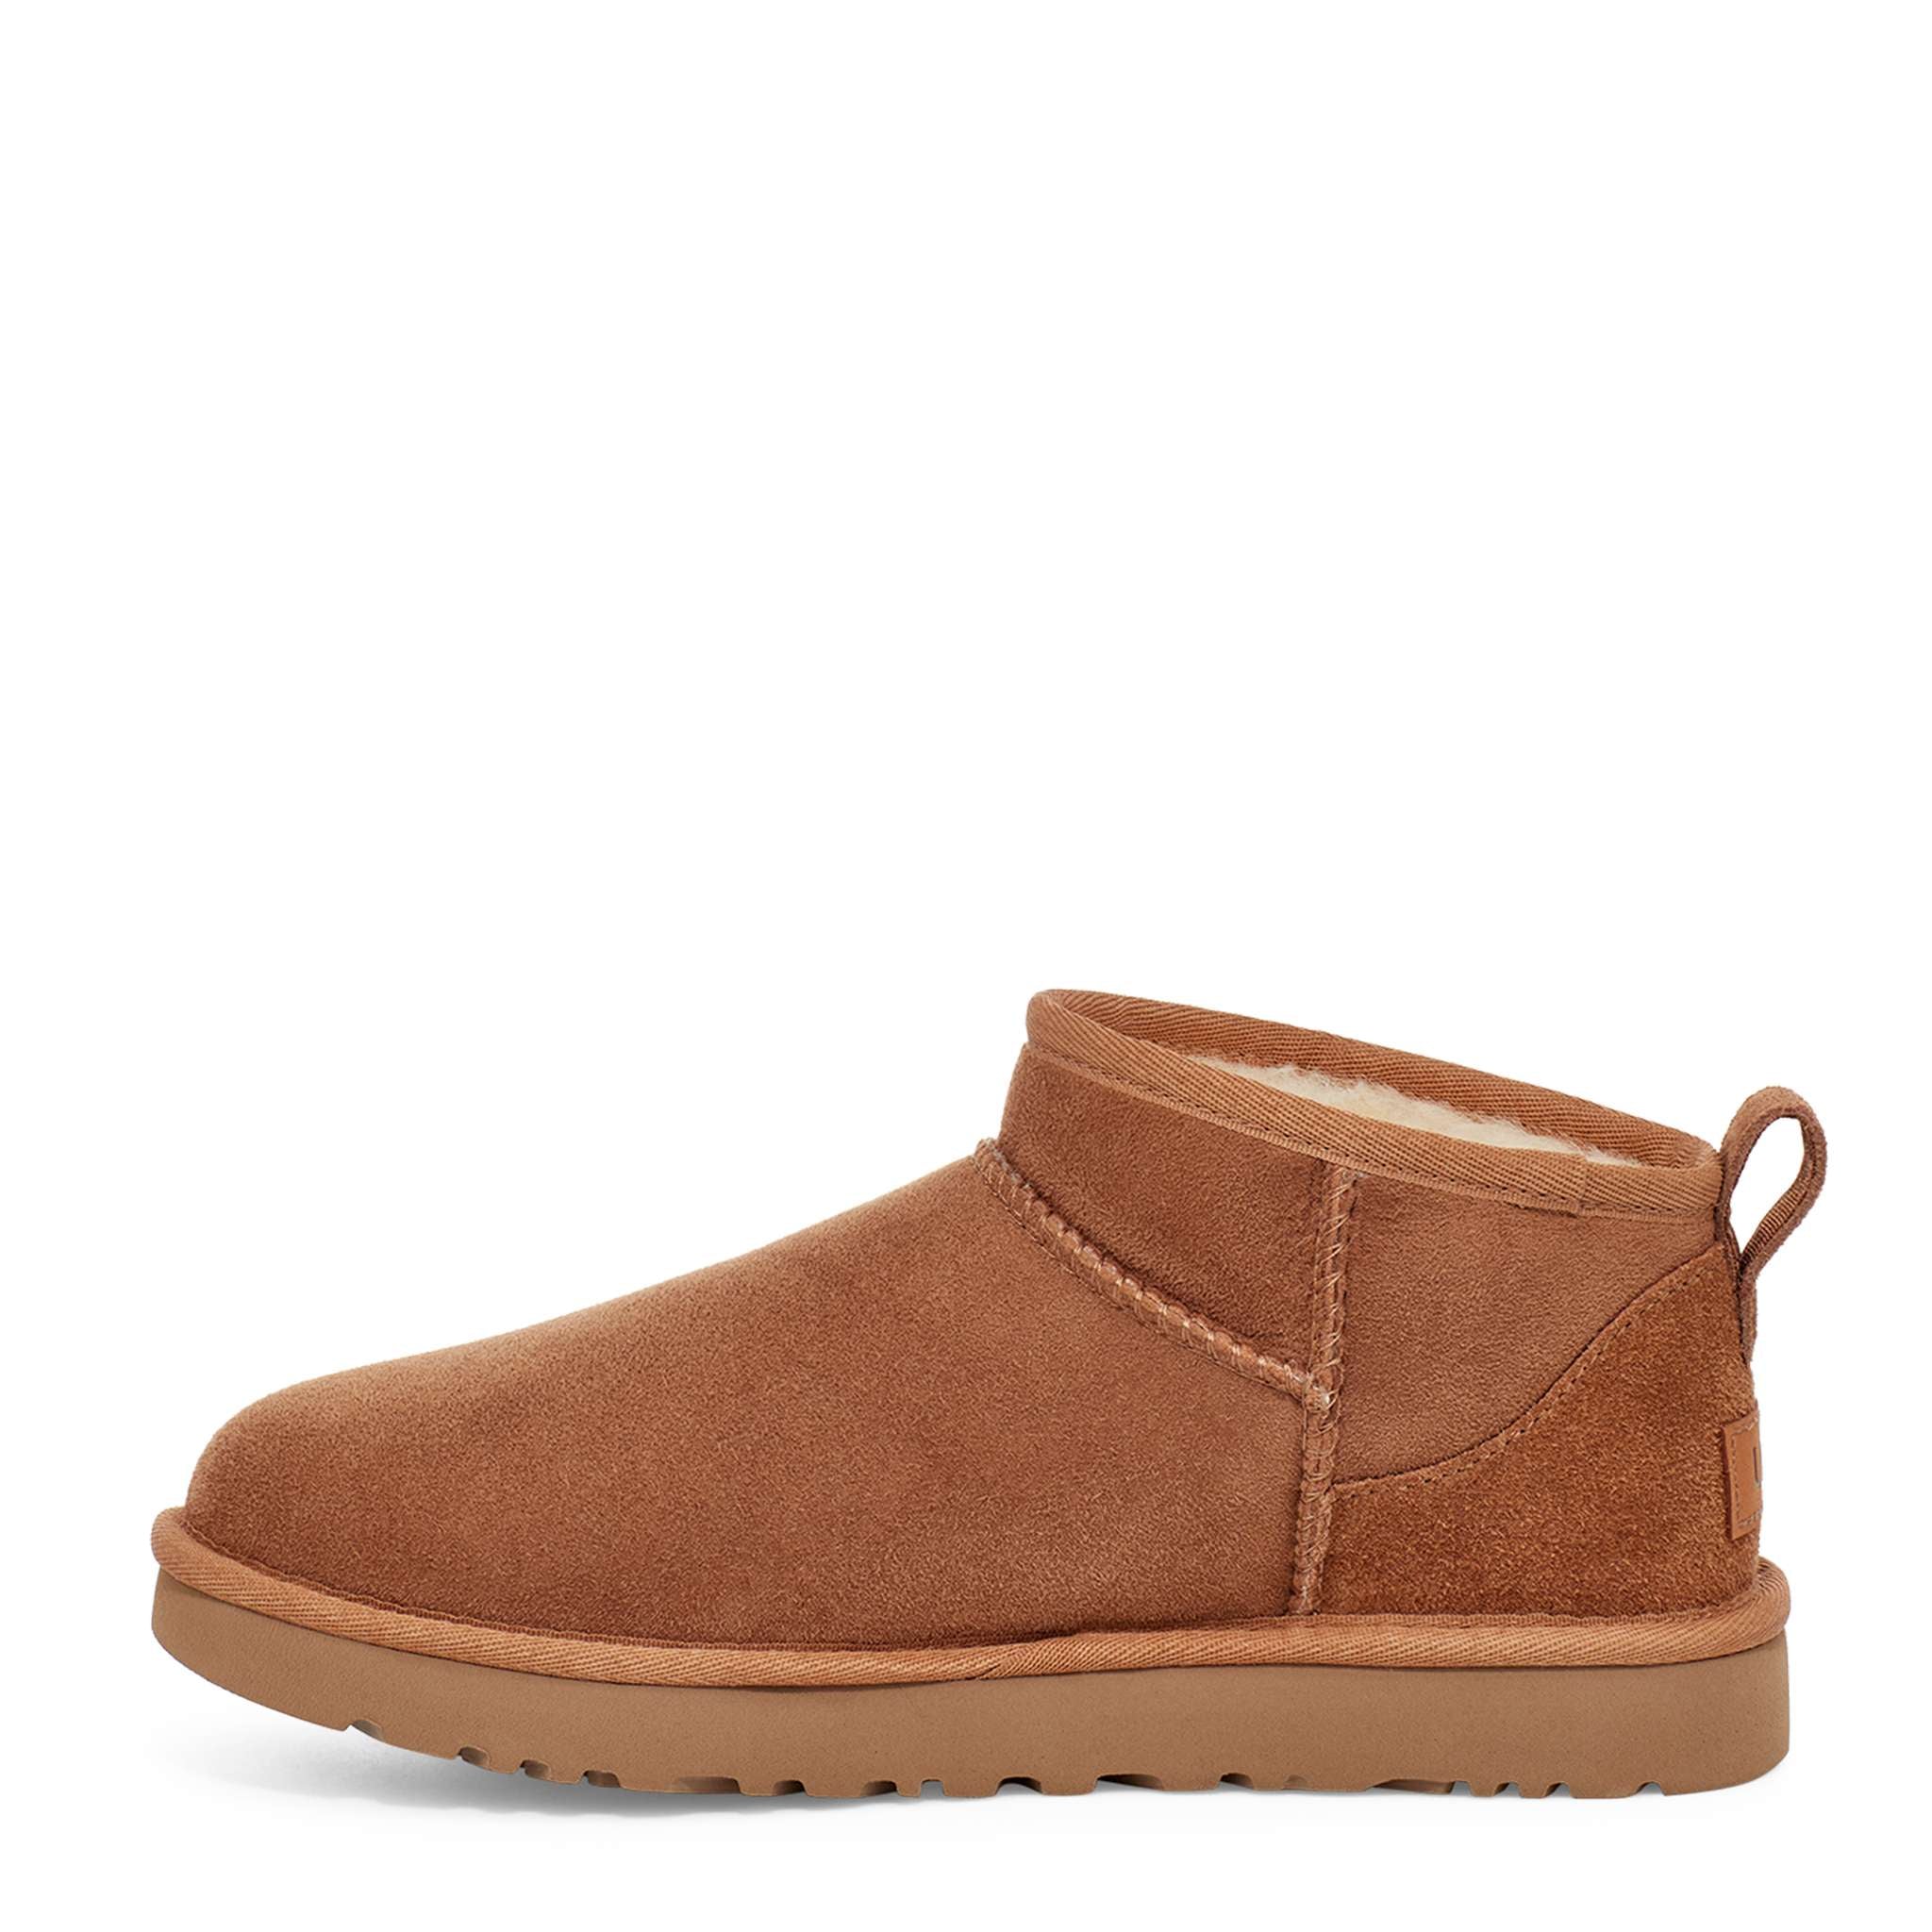 UGG W CLASSIC ULTRA MINI ankle boot 1116109 - Chestnut